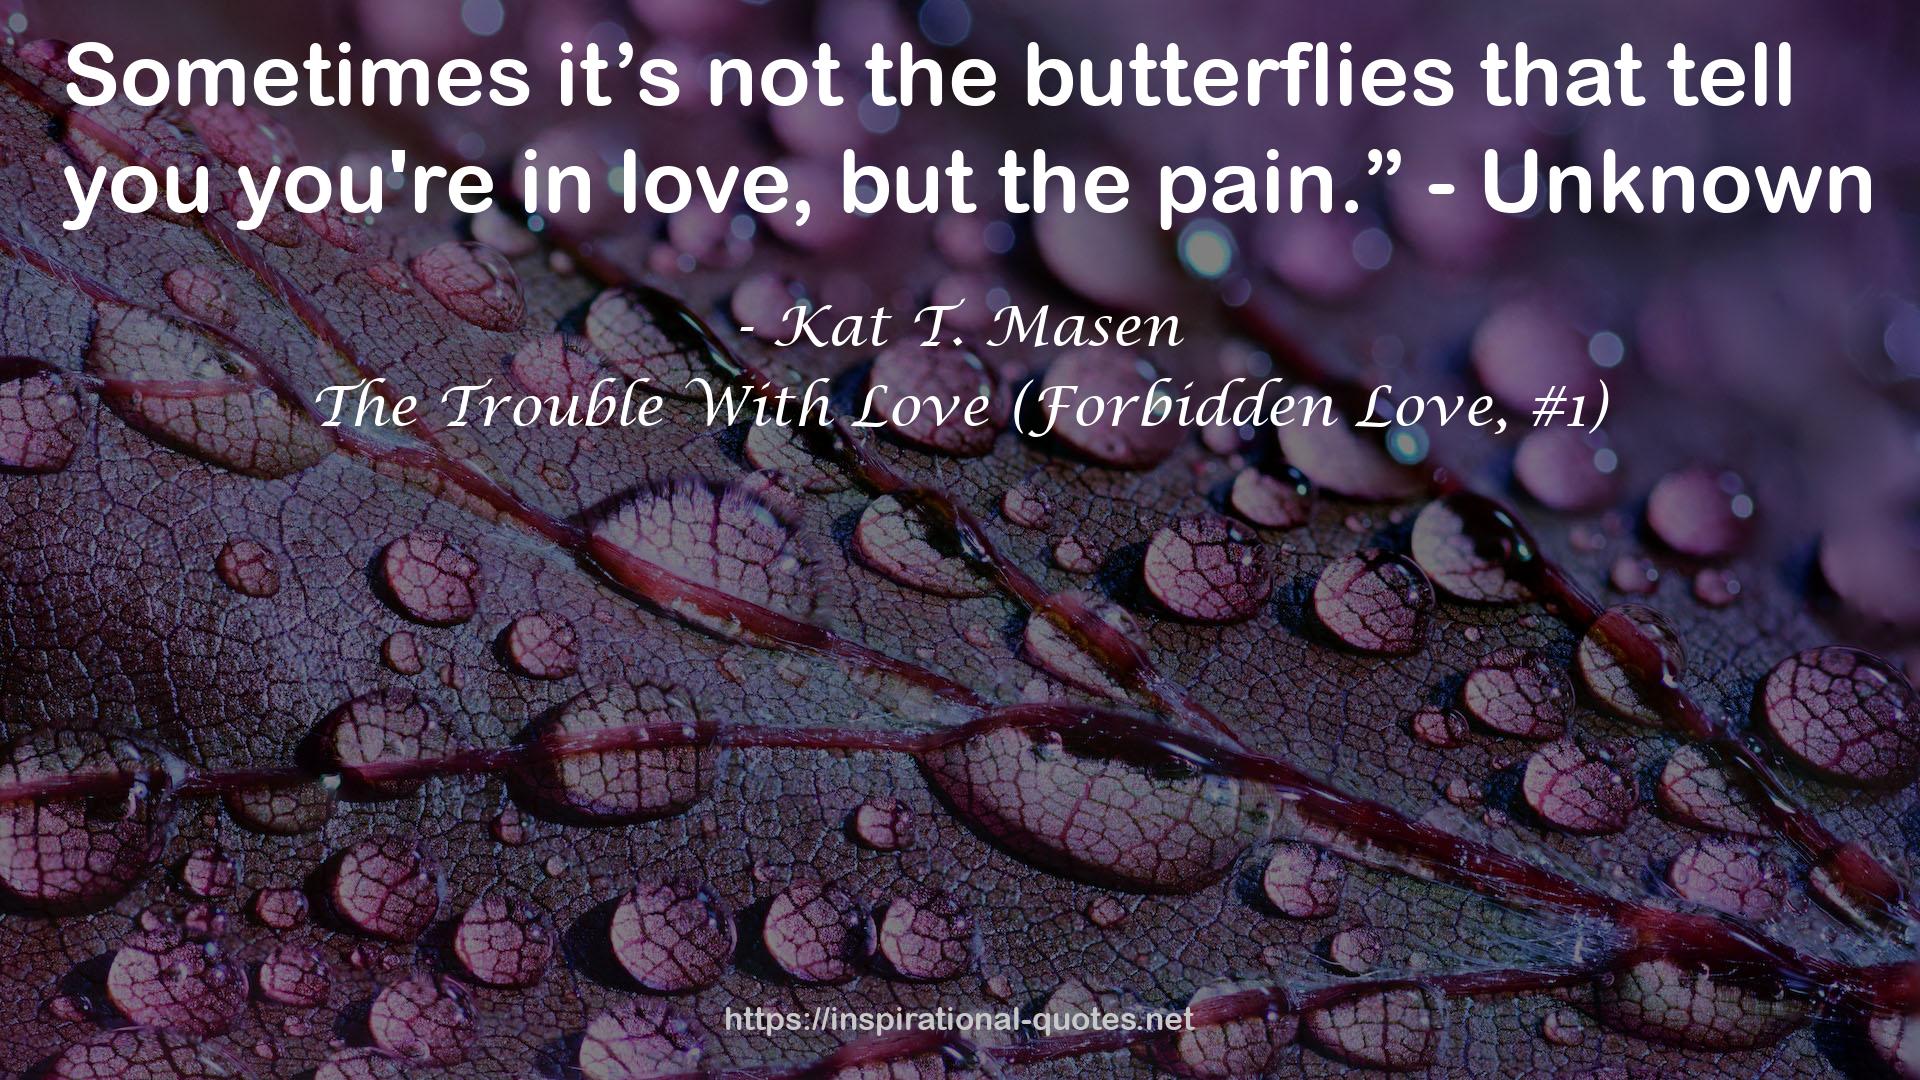 The Trouble With Love (Forbidden Love, #1) QUOTES